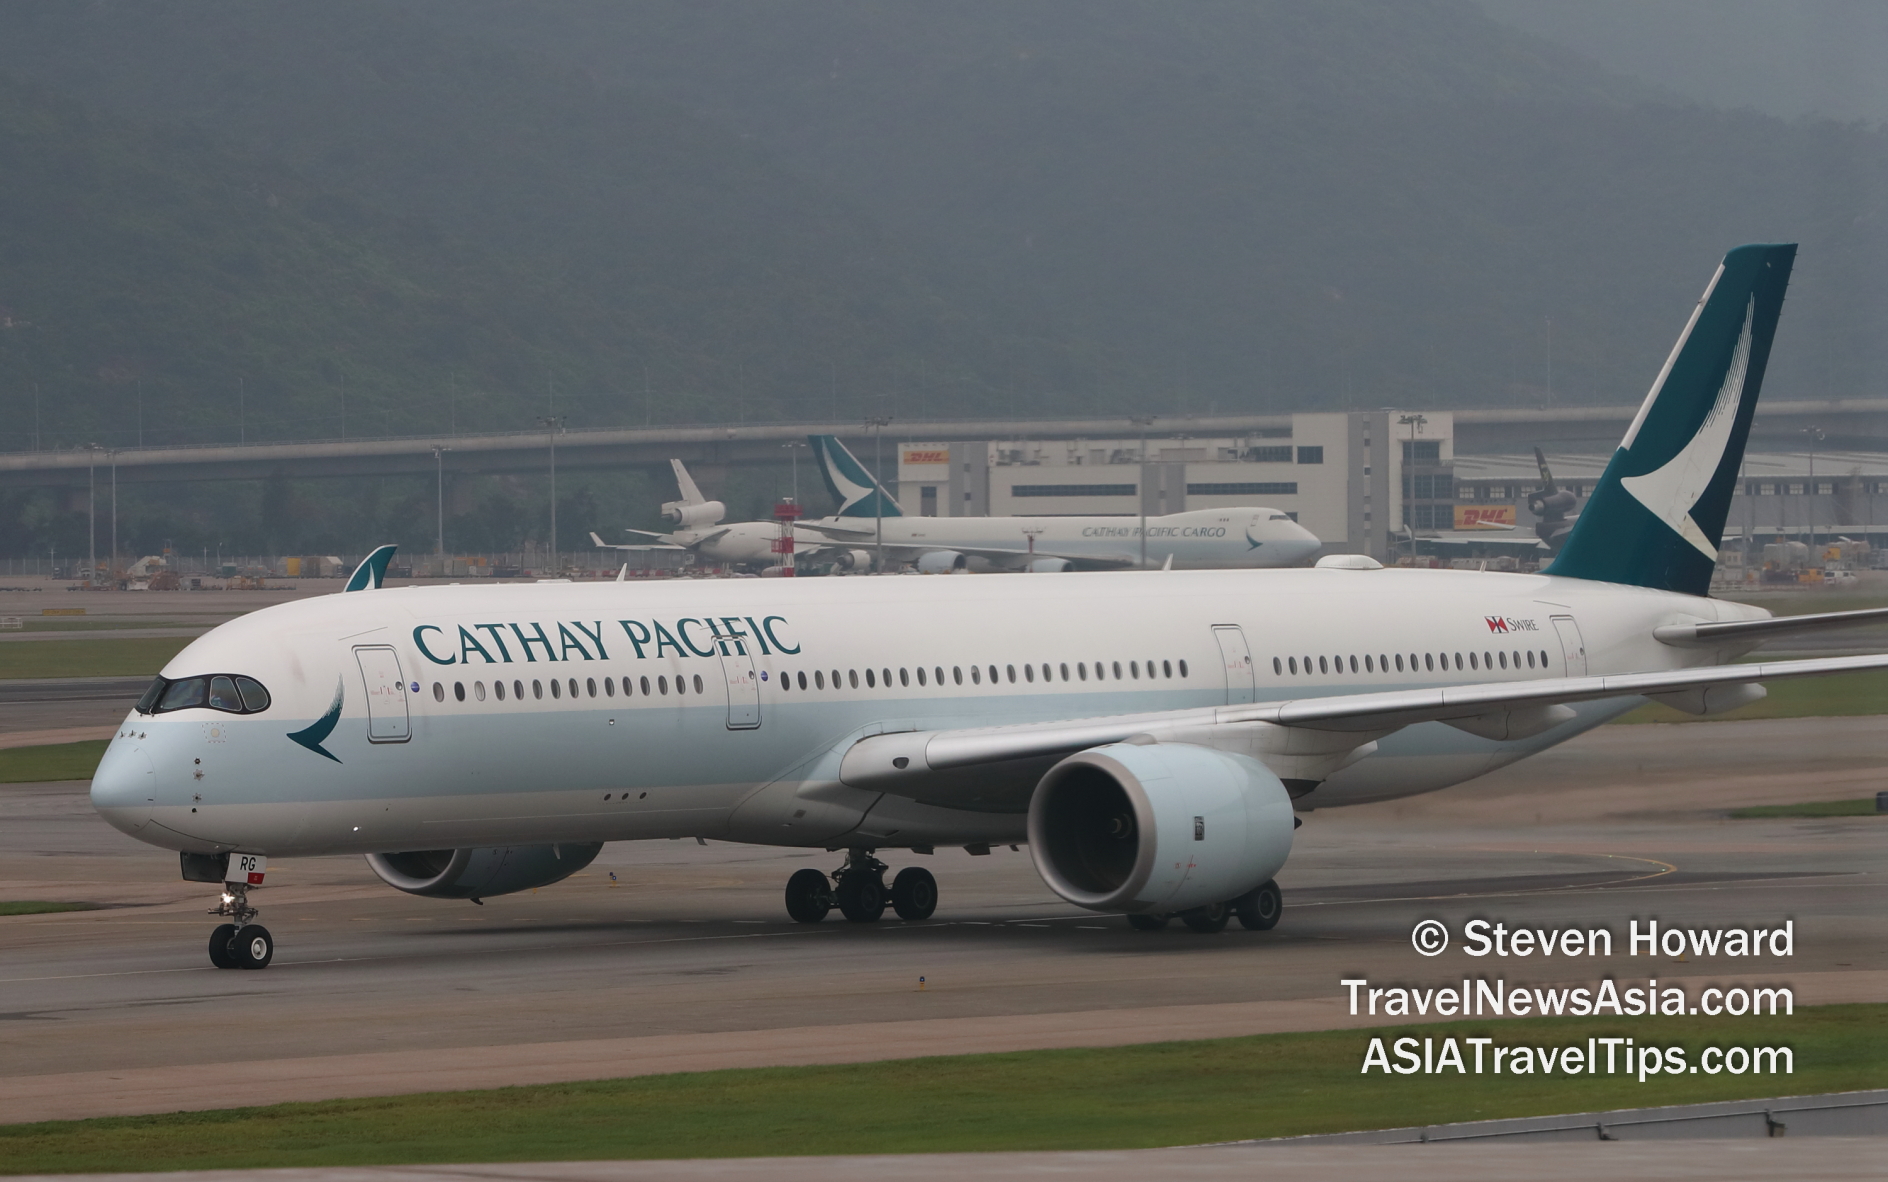 Cathay Pacific Airbus A350 at HKIA. Picture by Steven Howard of TravelNewsAsia.com Click to enlarge.